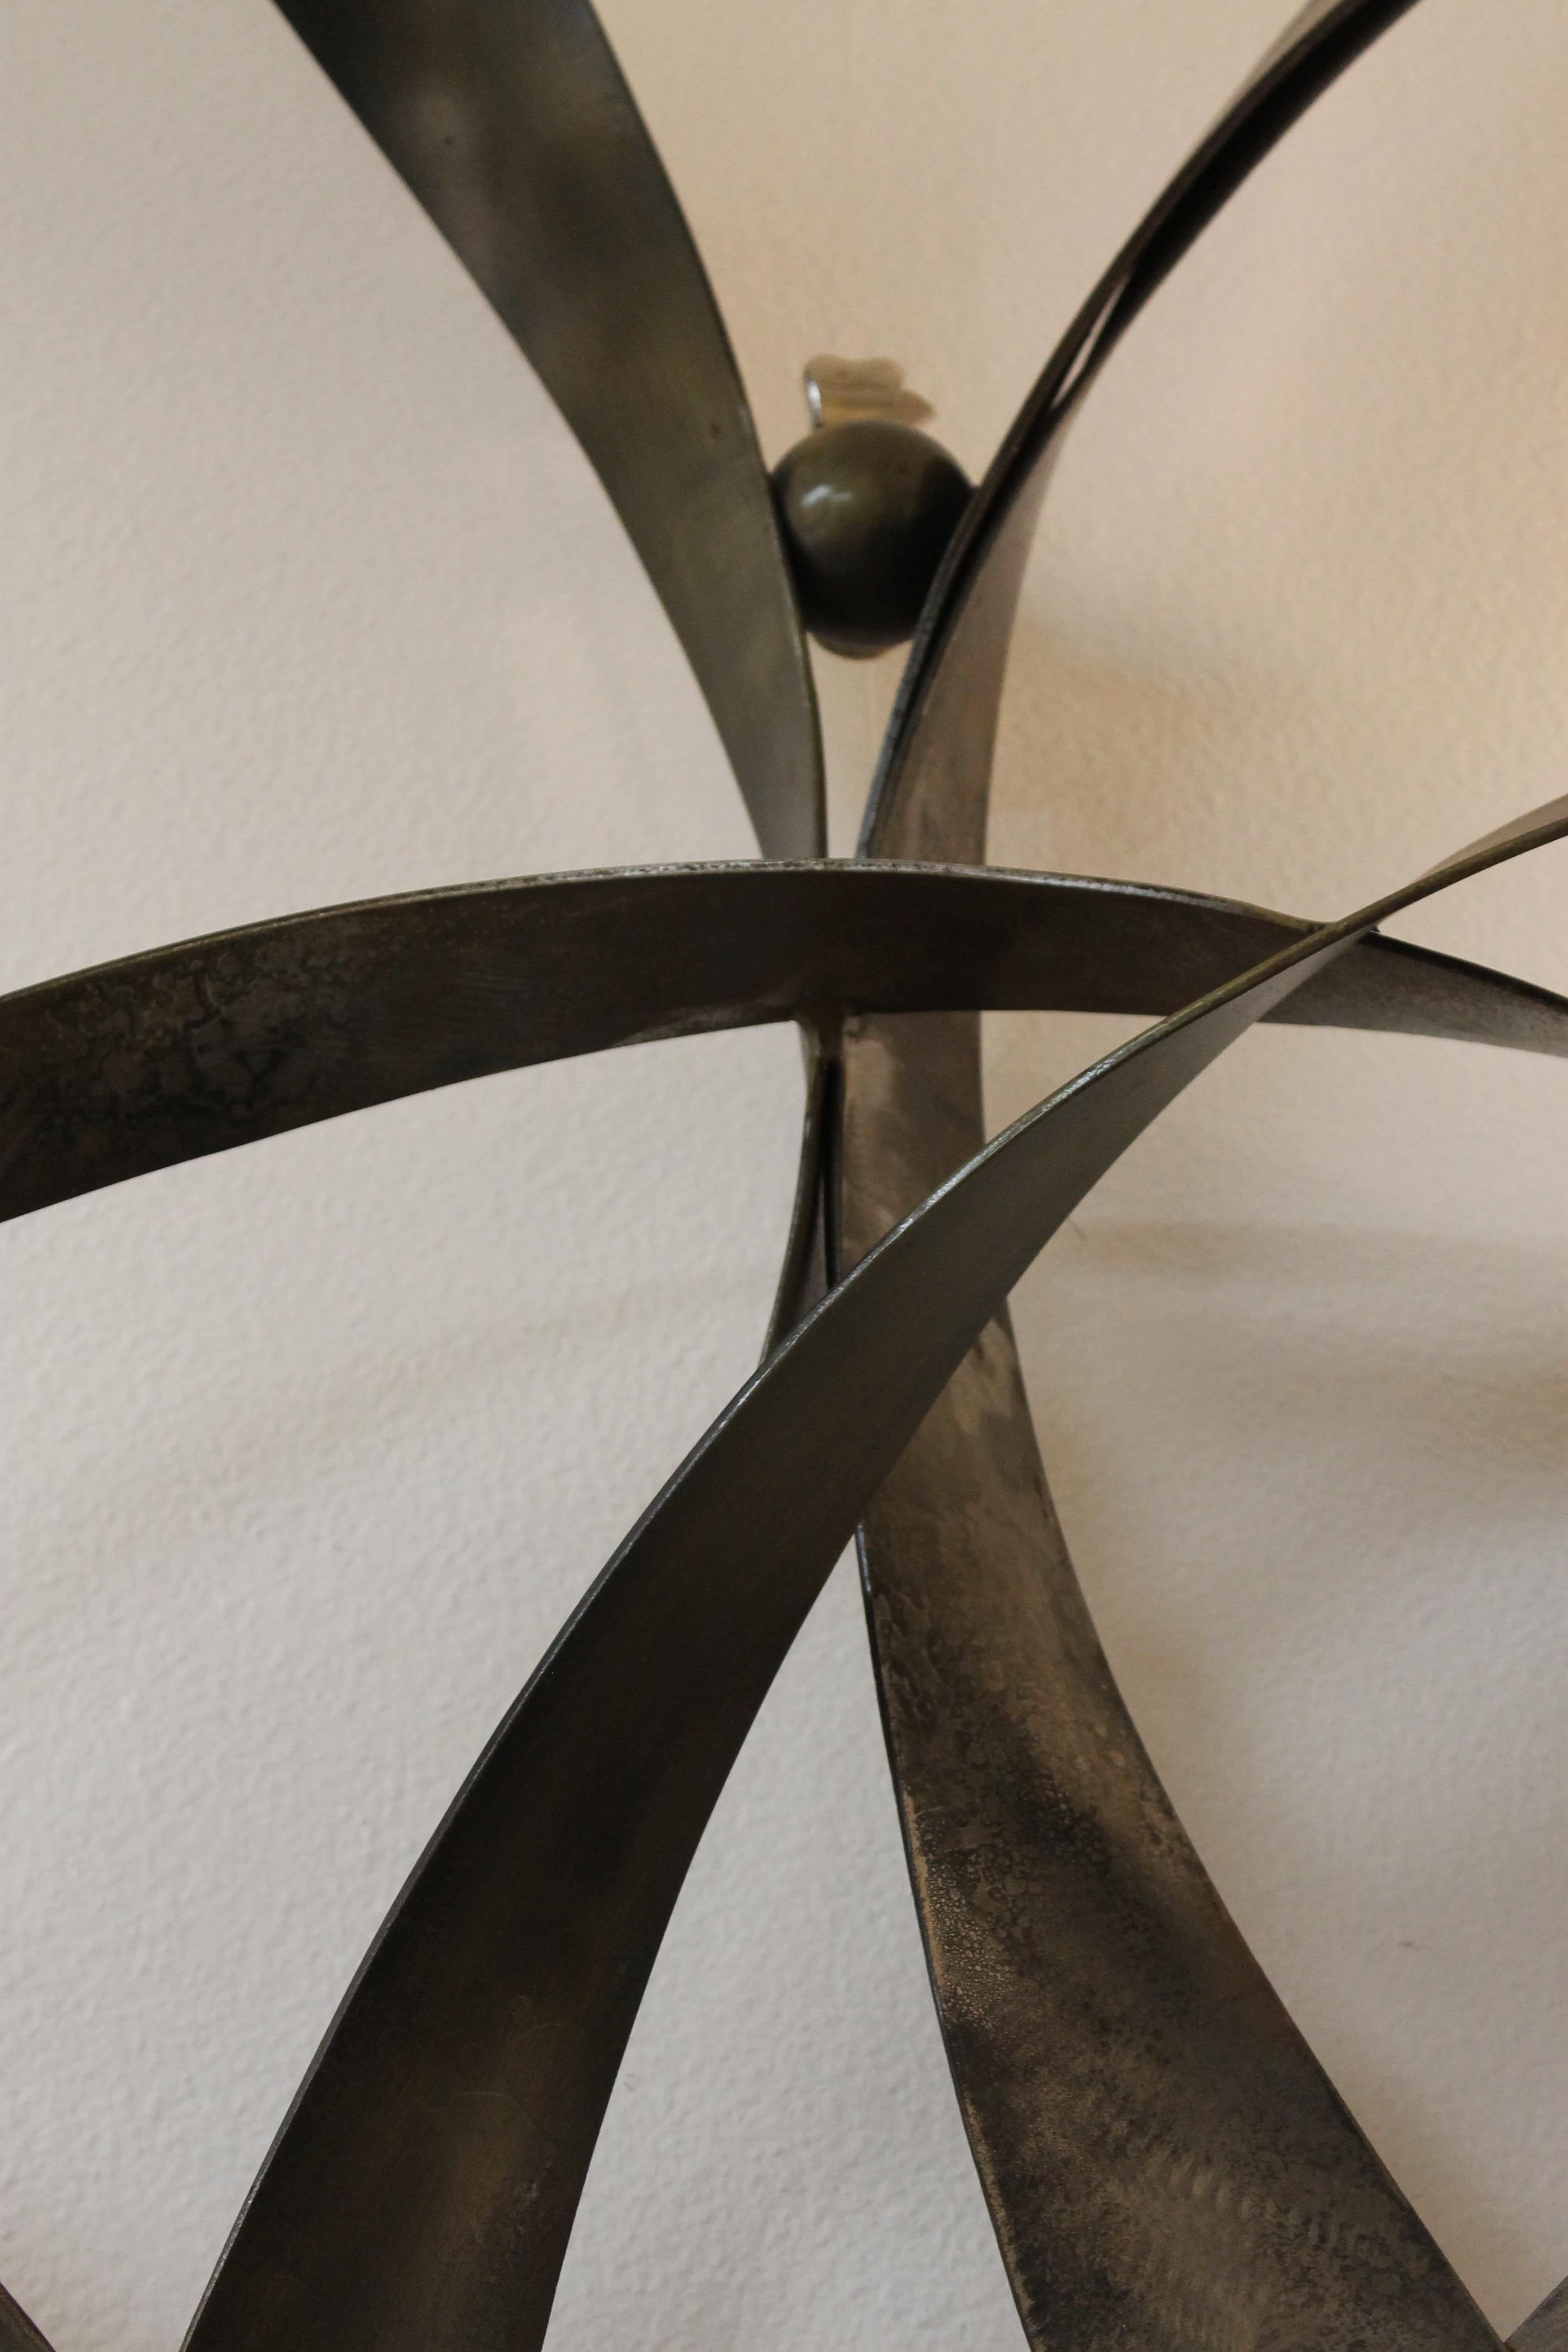 Late 20th Century Abstract Steel Wall Sculpture